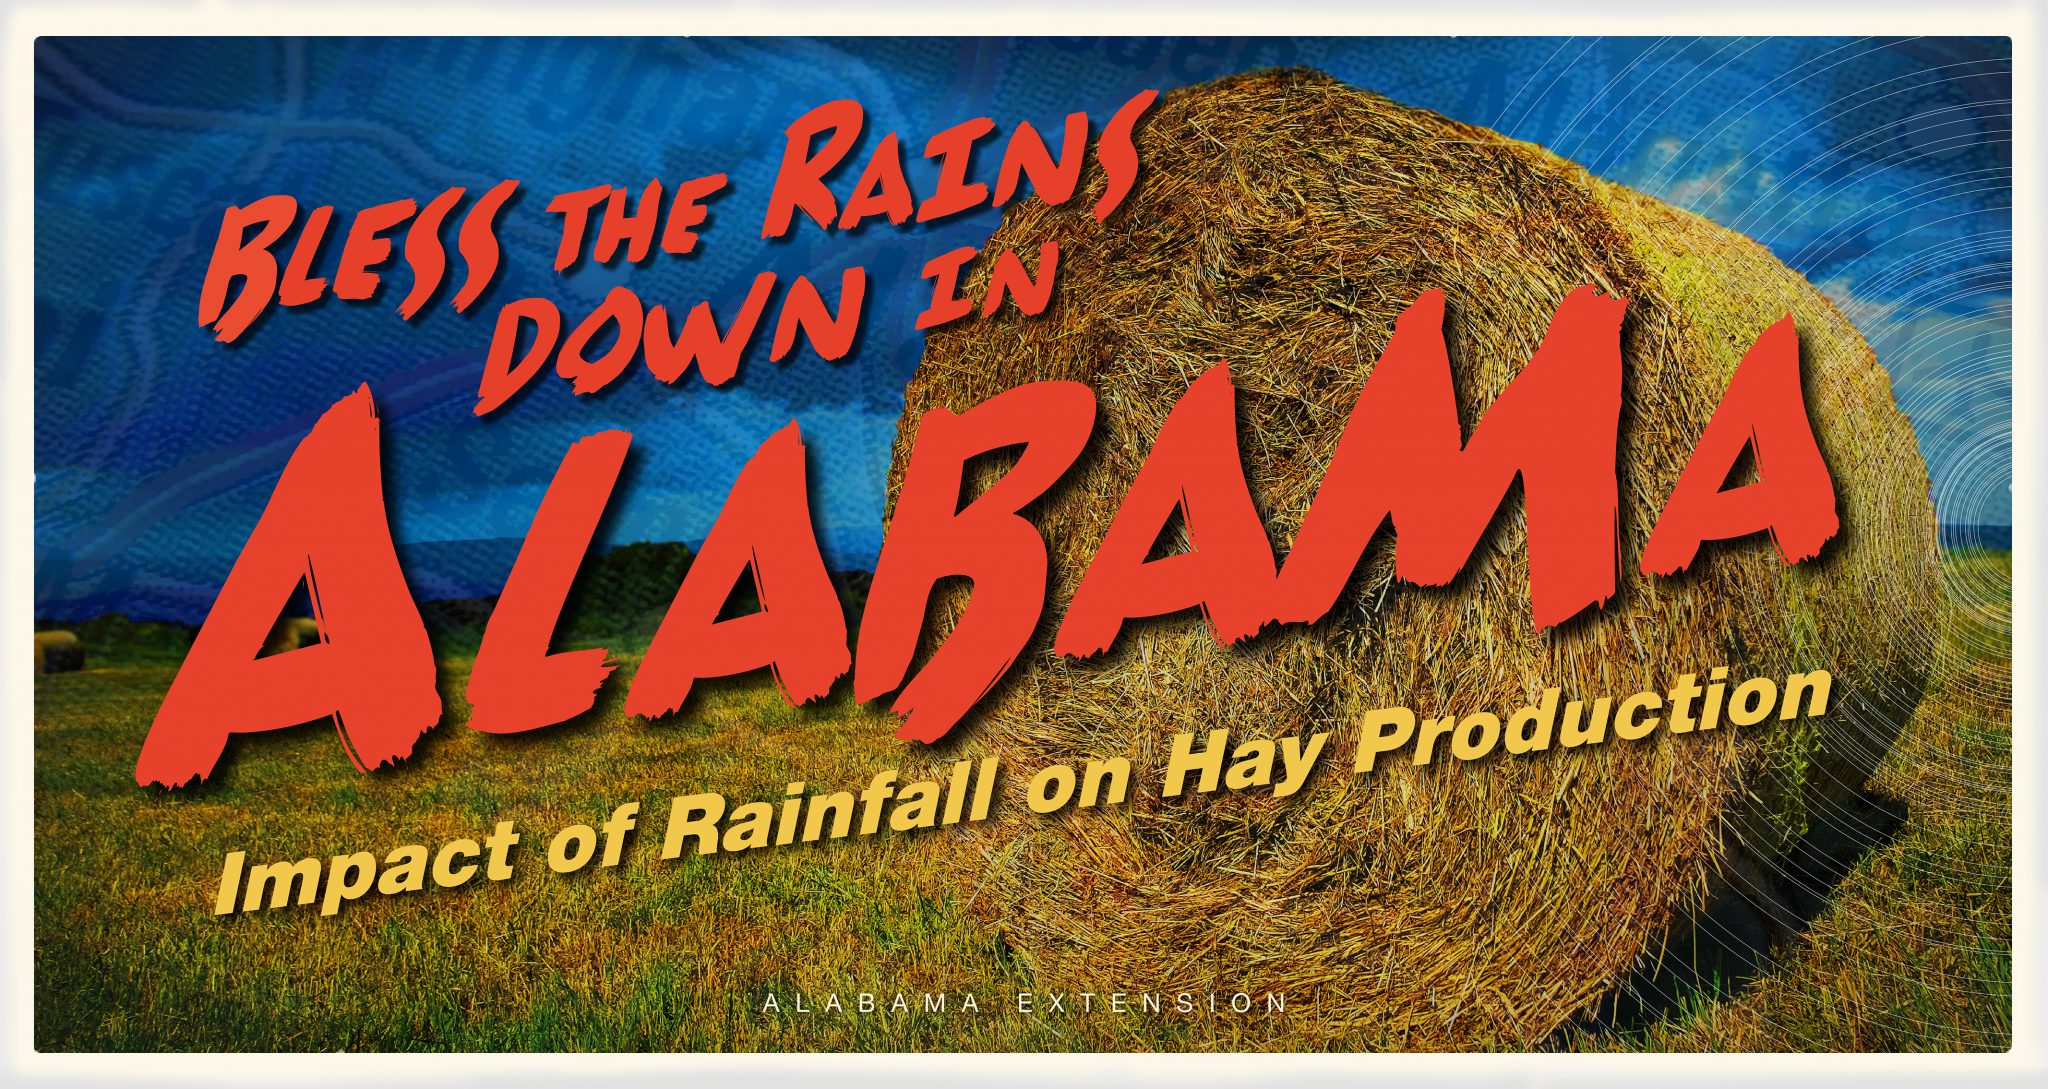 Bless the Rains Down in Alabama - Impact of Rainfall on Hay Production